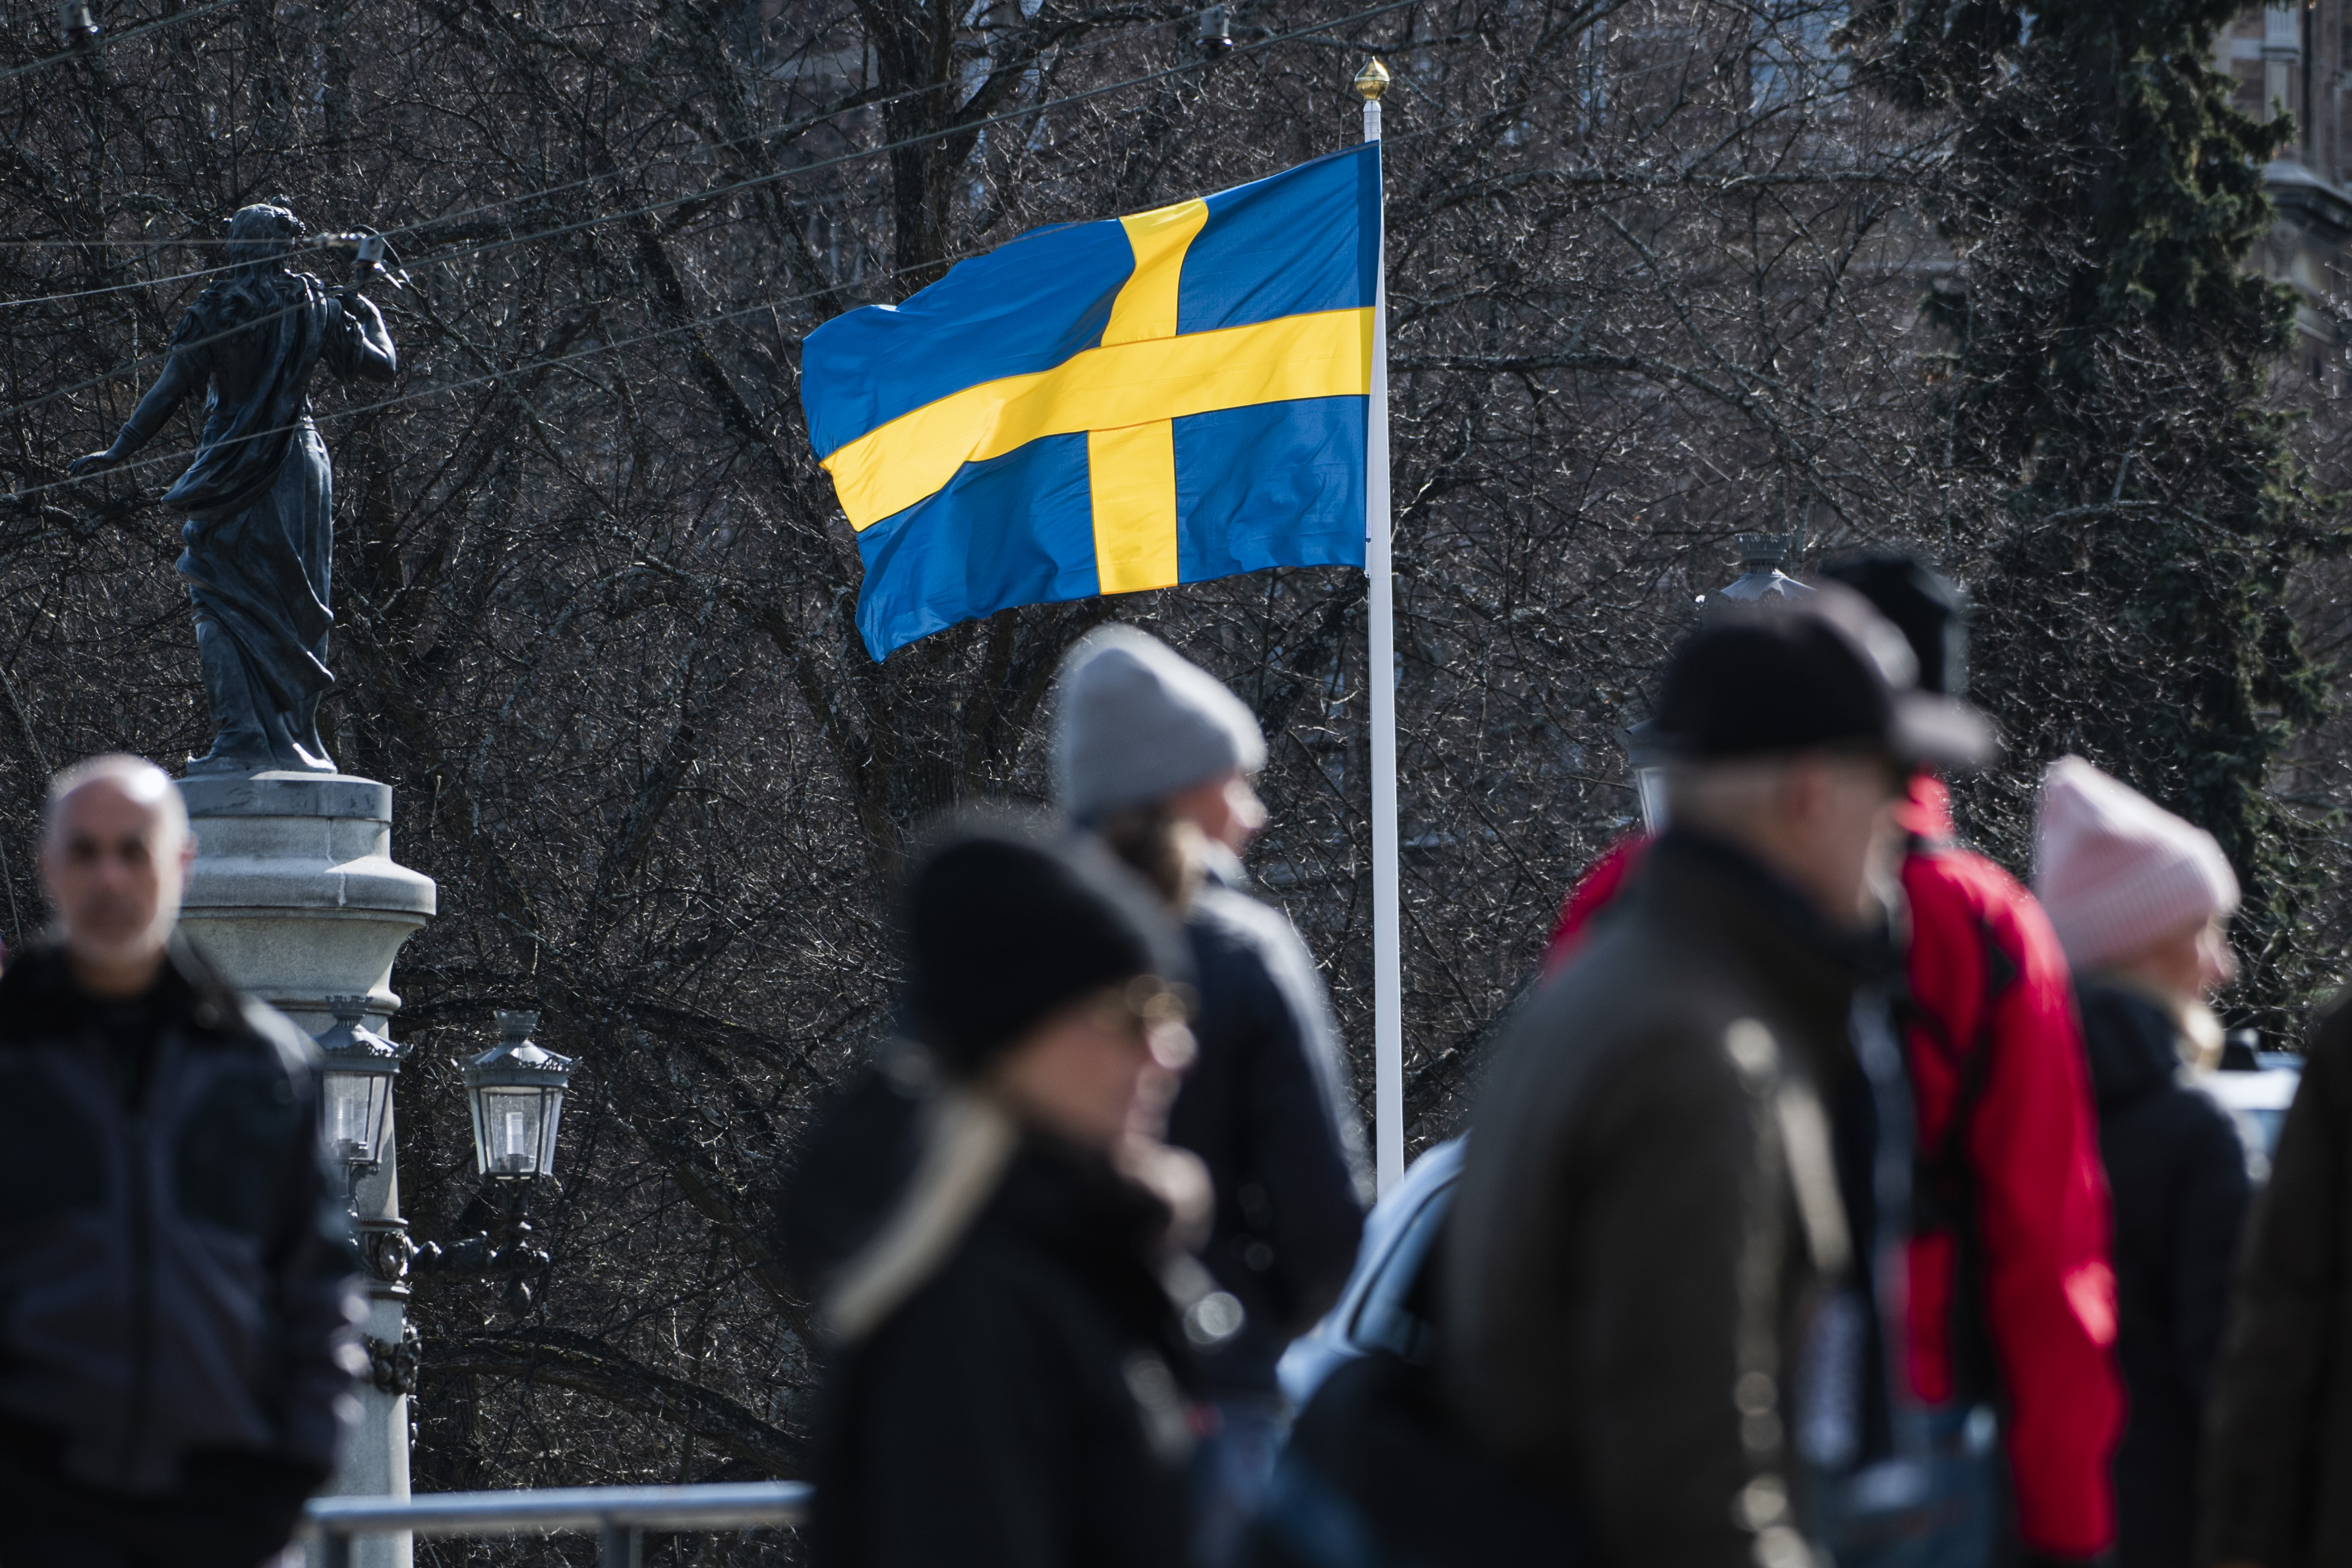 The Swedish flag is pictured on April 4, 2020 in Stockholm during the the new coronavirus COVID-19 pamdemic. (Photo by Jonathan NACKSTRAND / AFP) (Photo by JONATHAN NACKSTRAND/AFP via Getty I